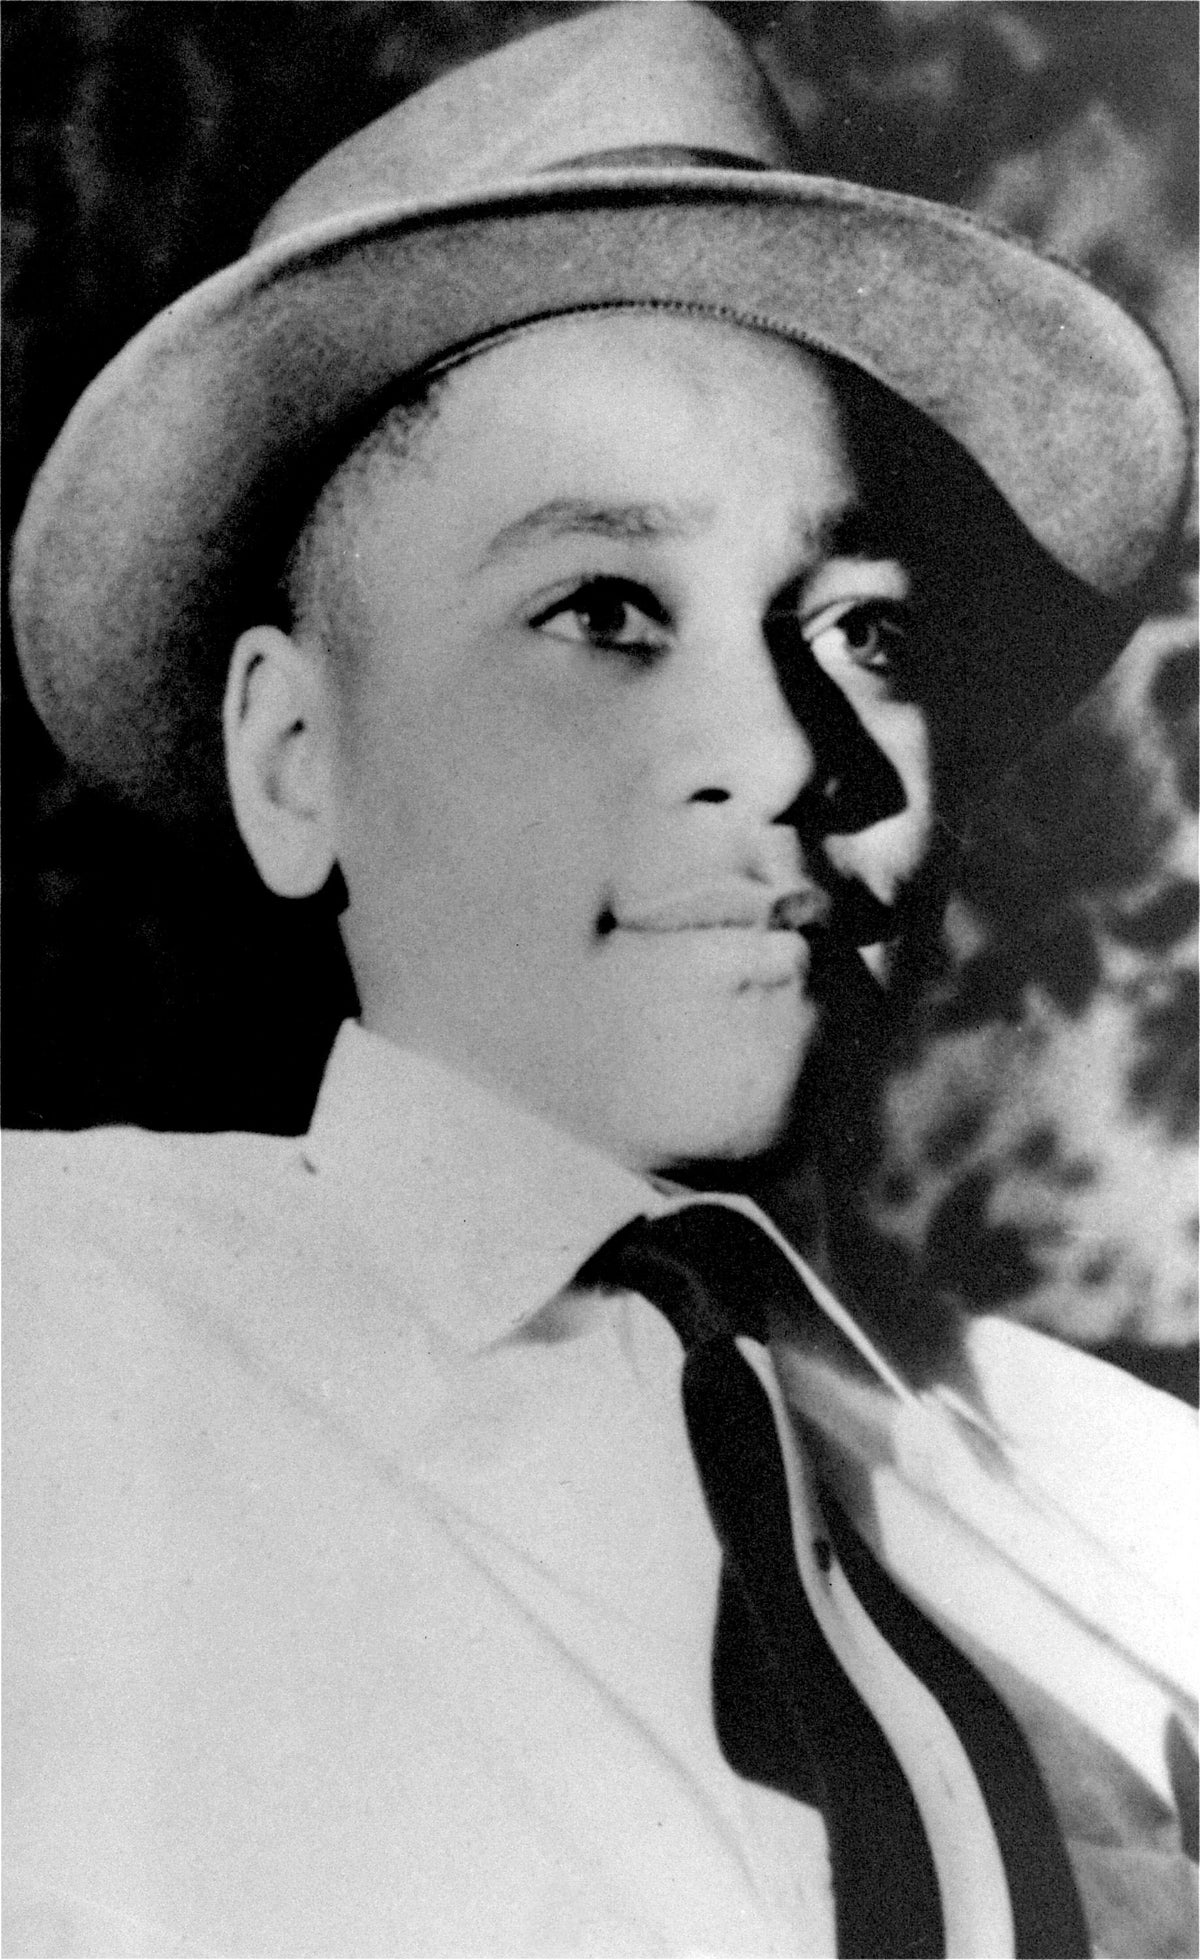 Mississippi grand jury declines to indict white woman whose accusations lead to Emmett Till lynching